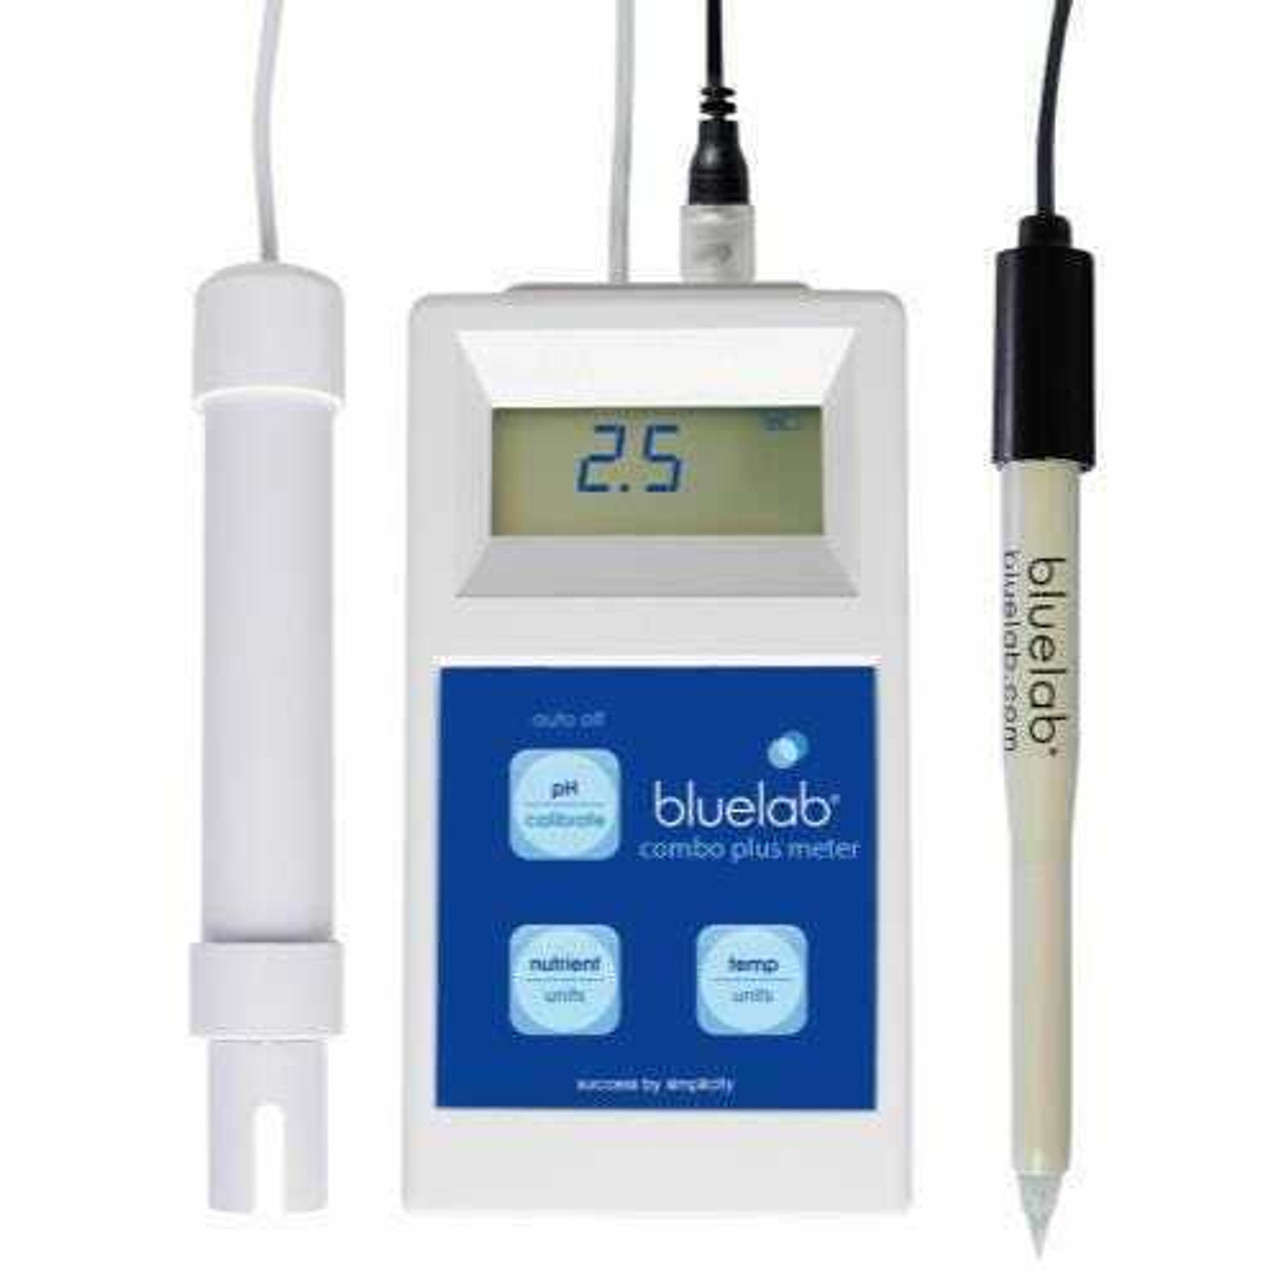 Bluelab Combo Plus Meter - Probe Included - 1